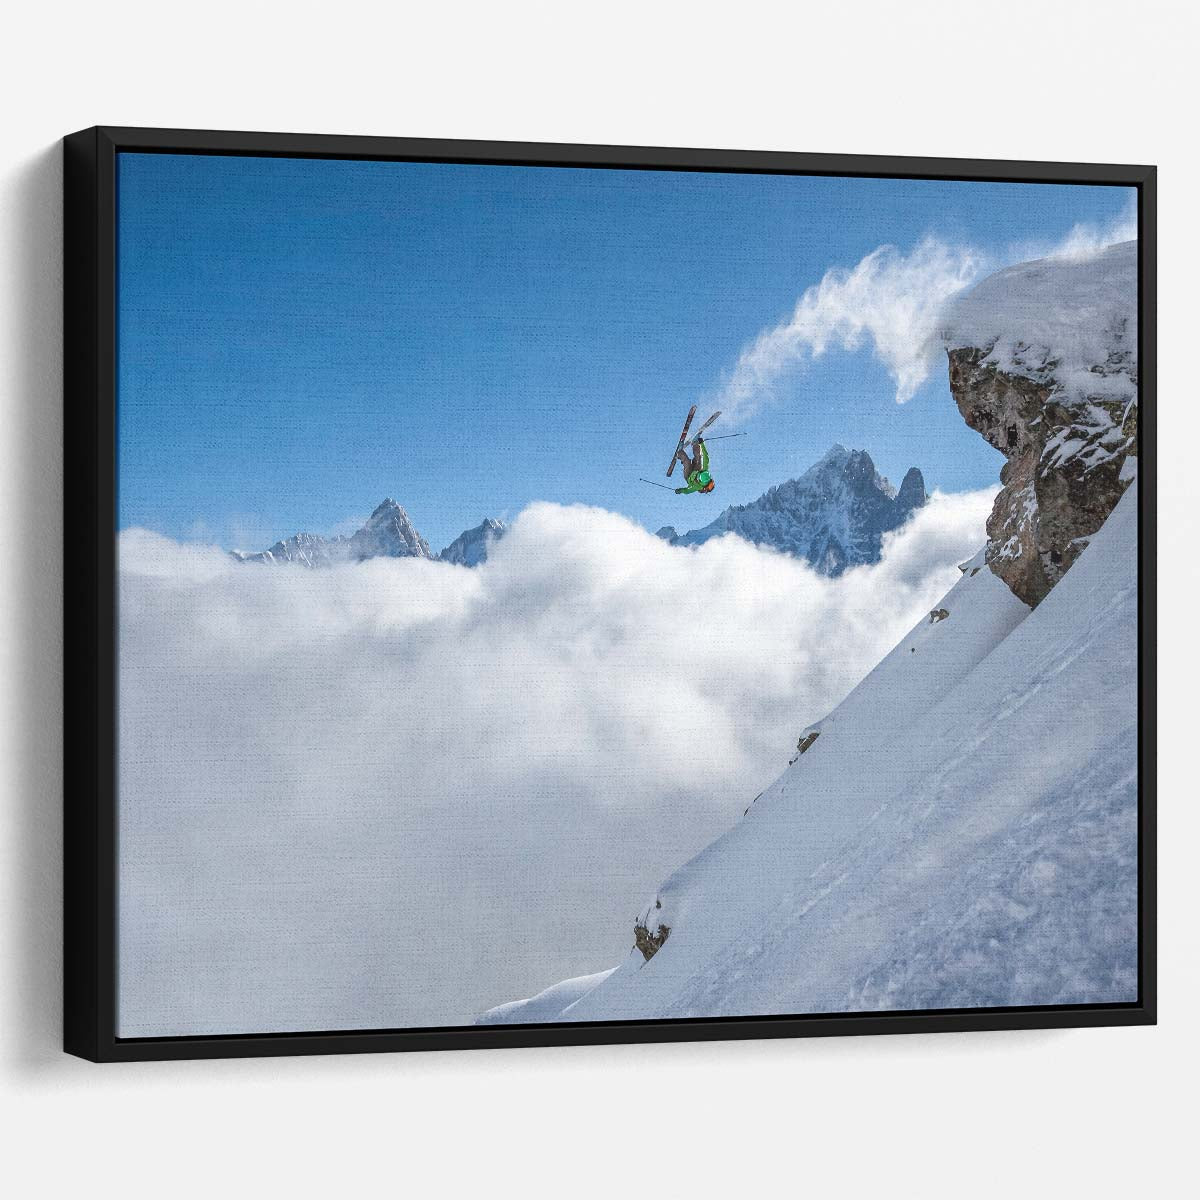 Extreme Alpine Ski Jump & Backflip Wall Art by Luxuriance Designs. Made in USA.